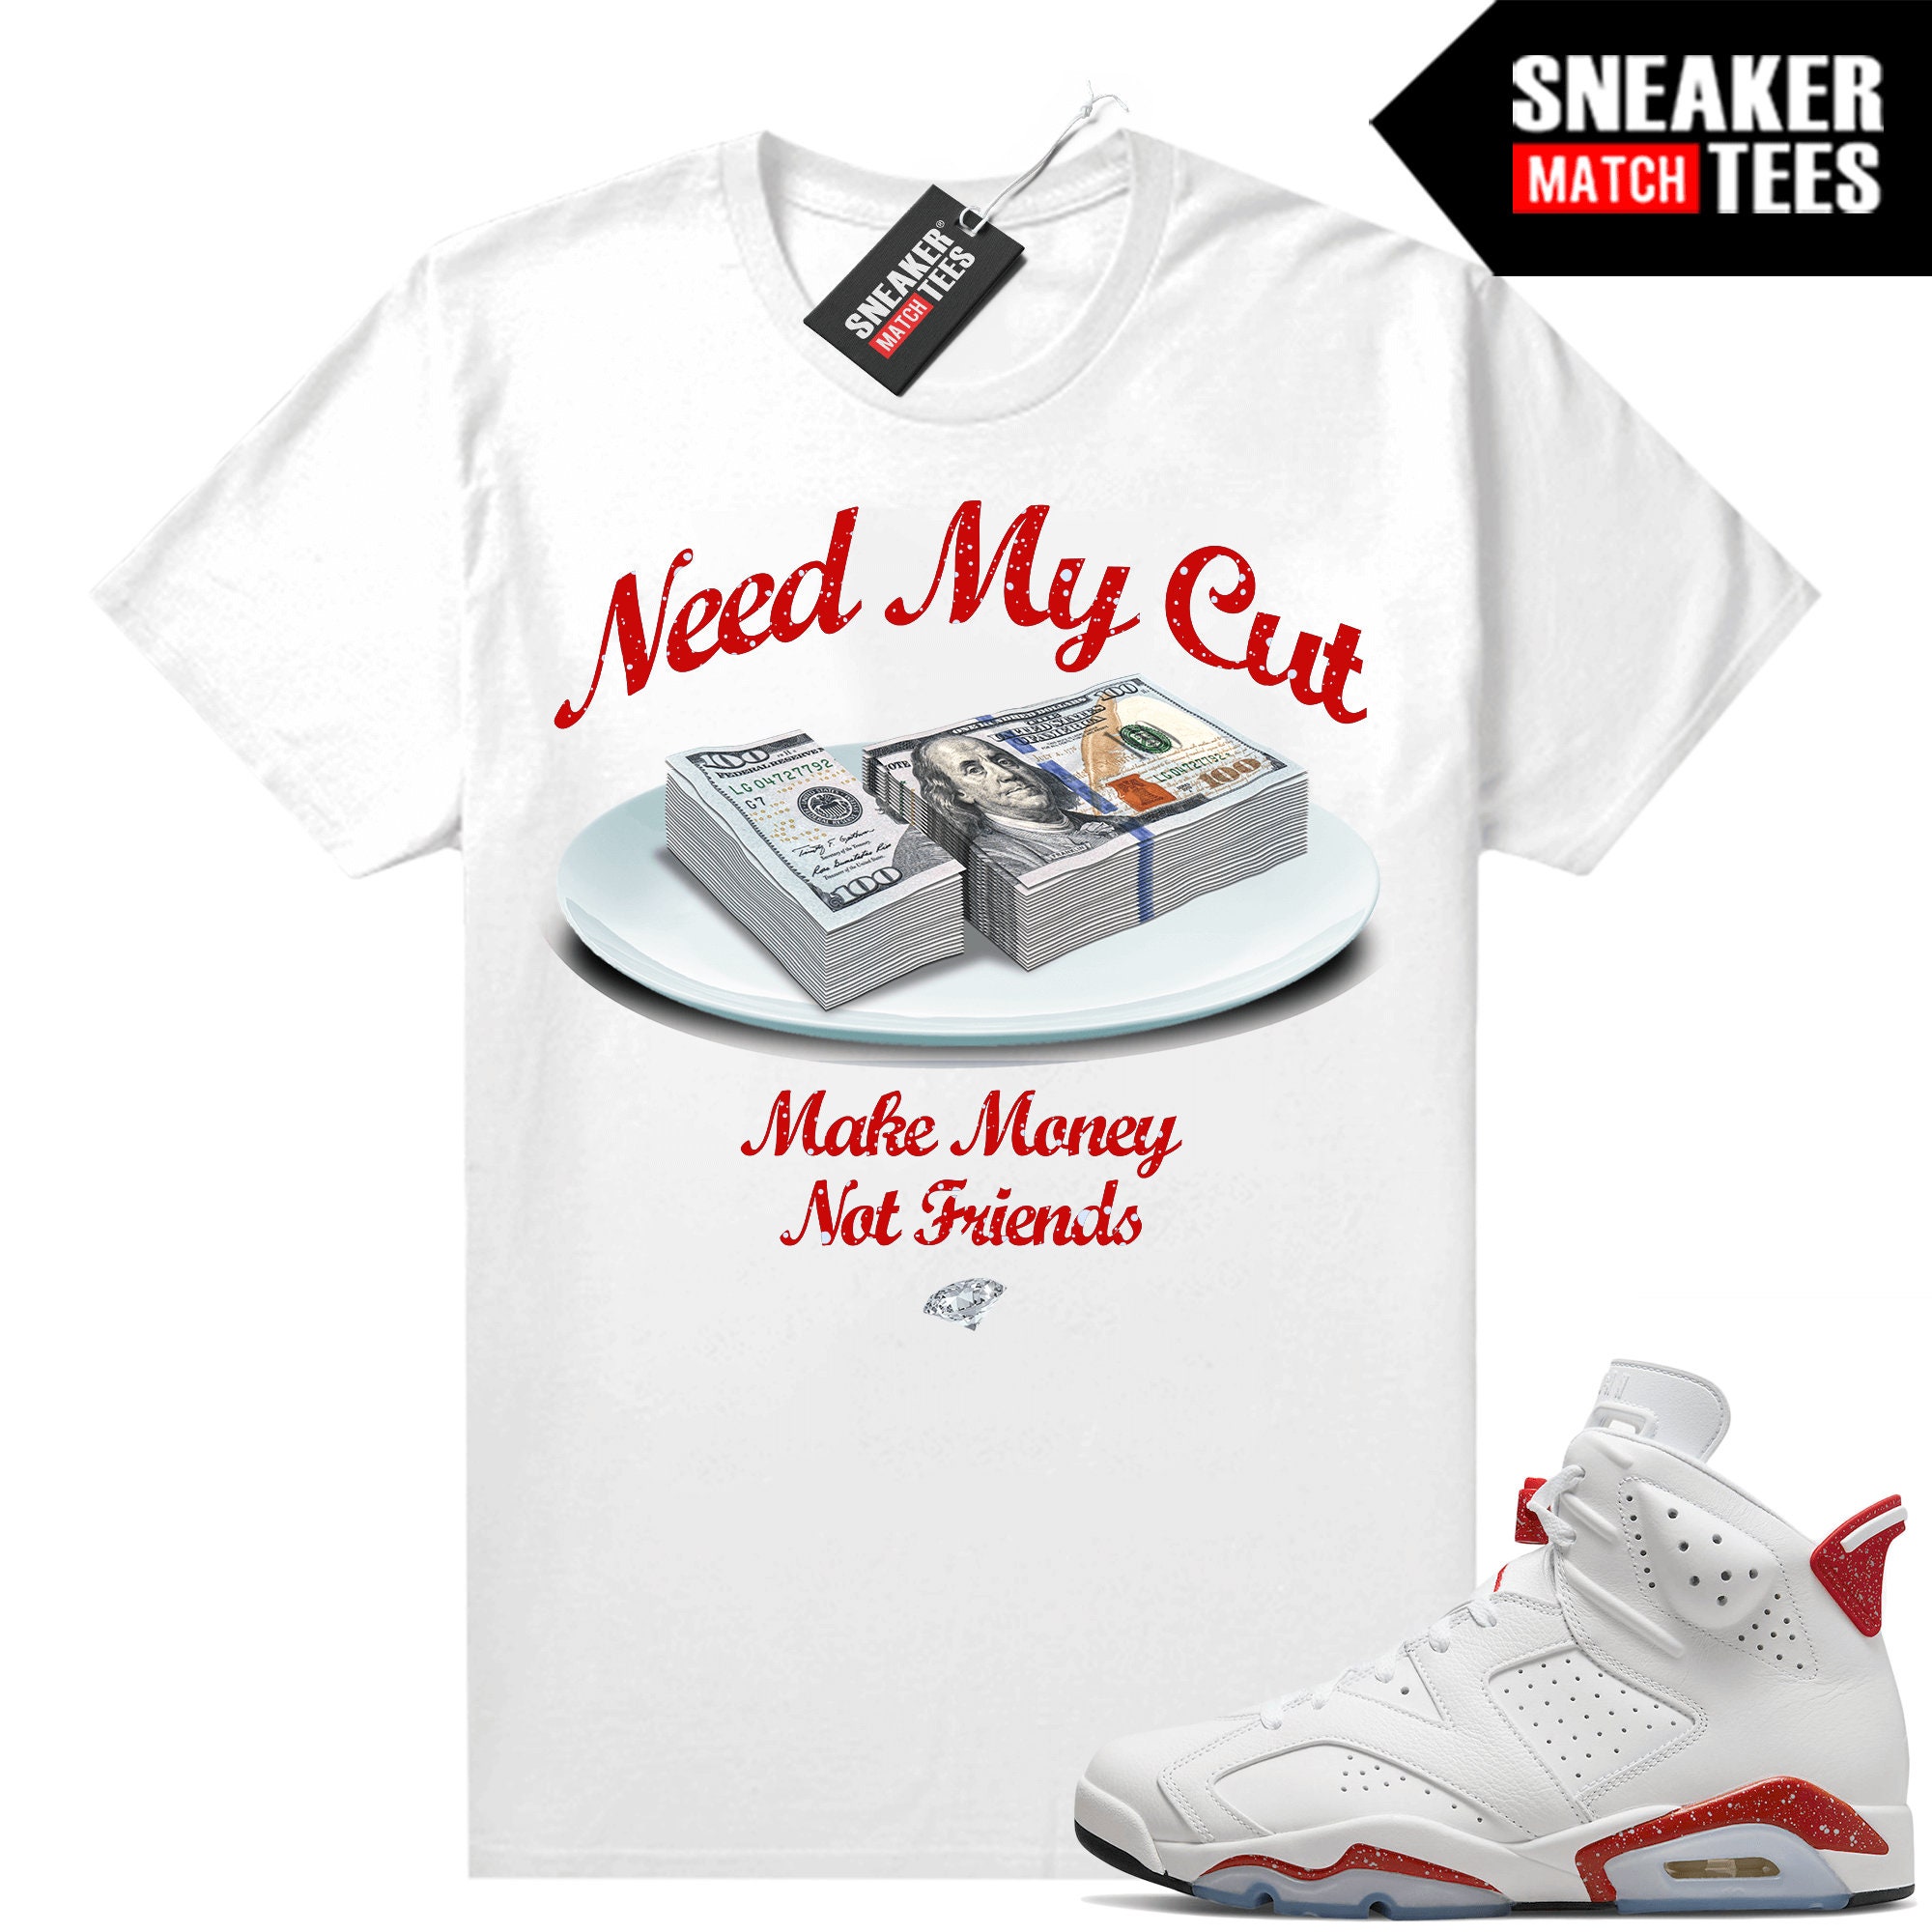 Red 6s Shirts to Match Sneaker Match - Etsy